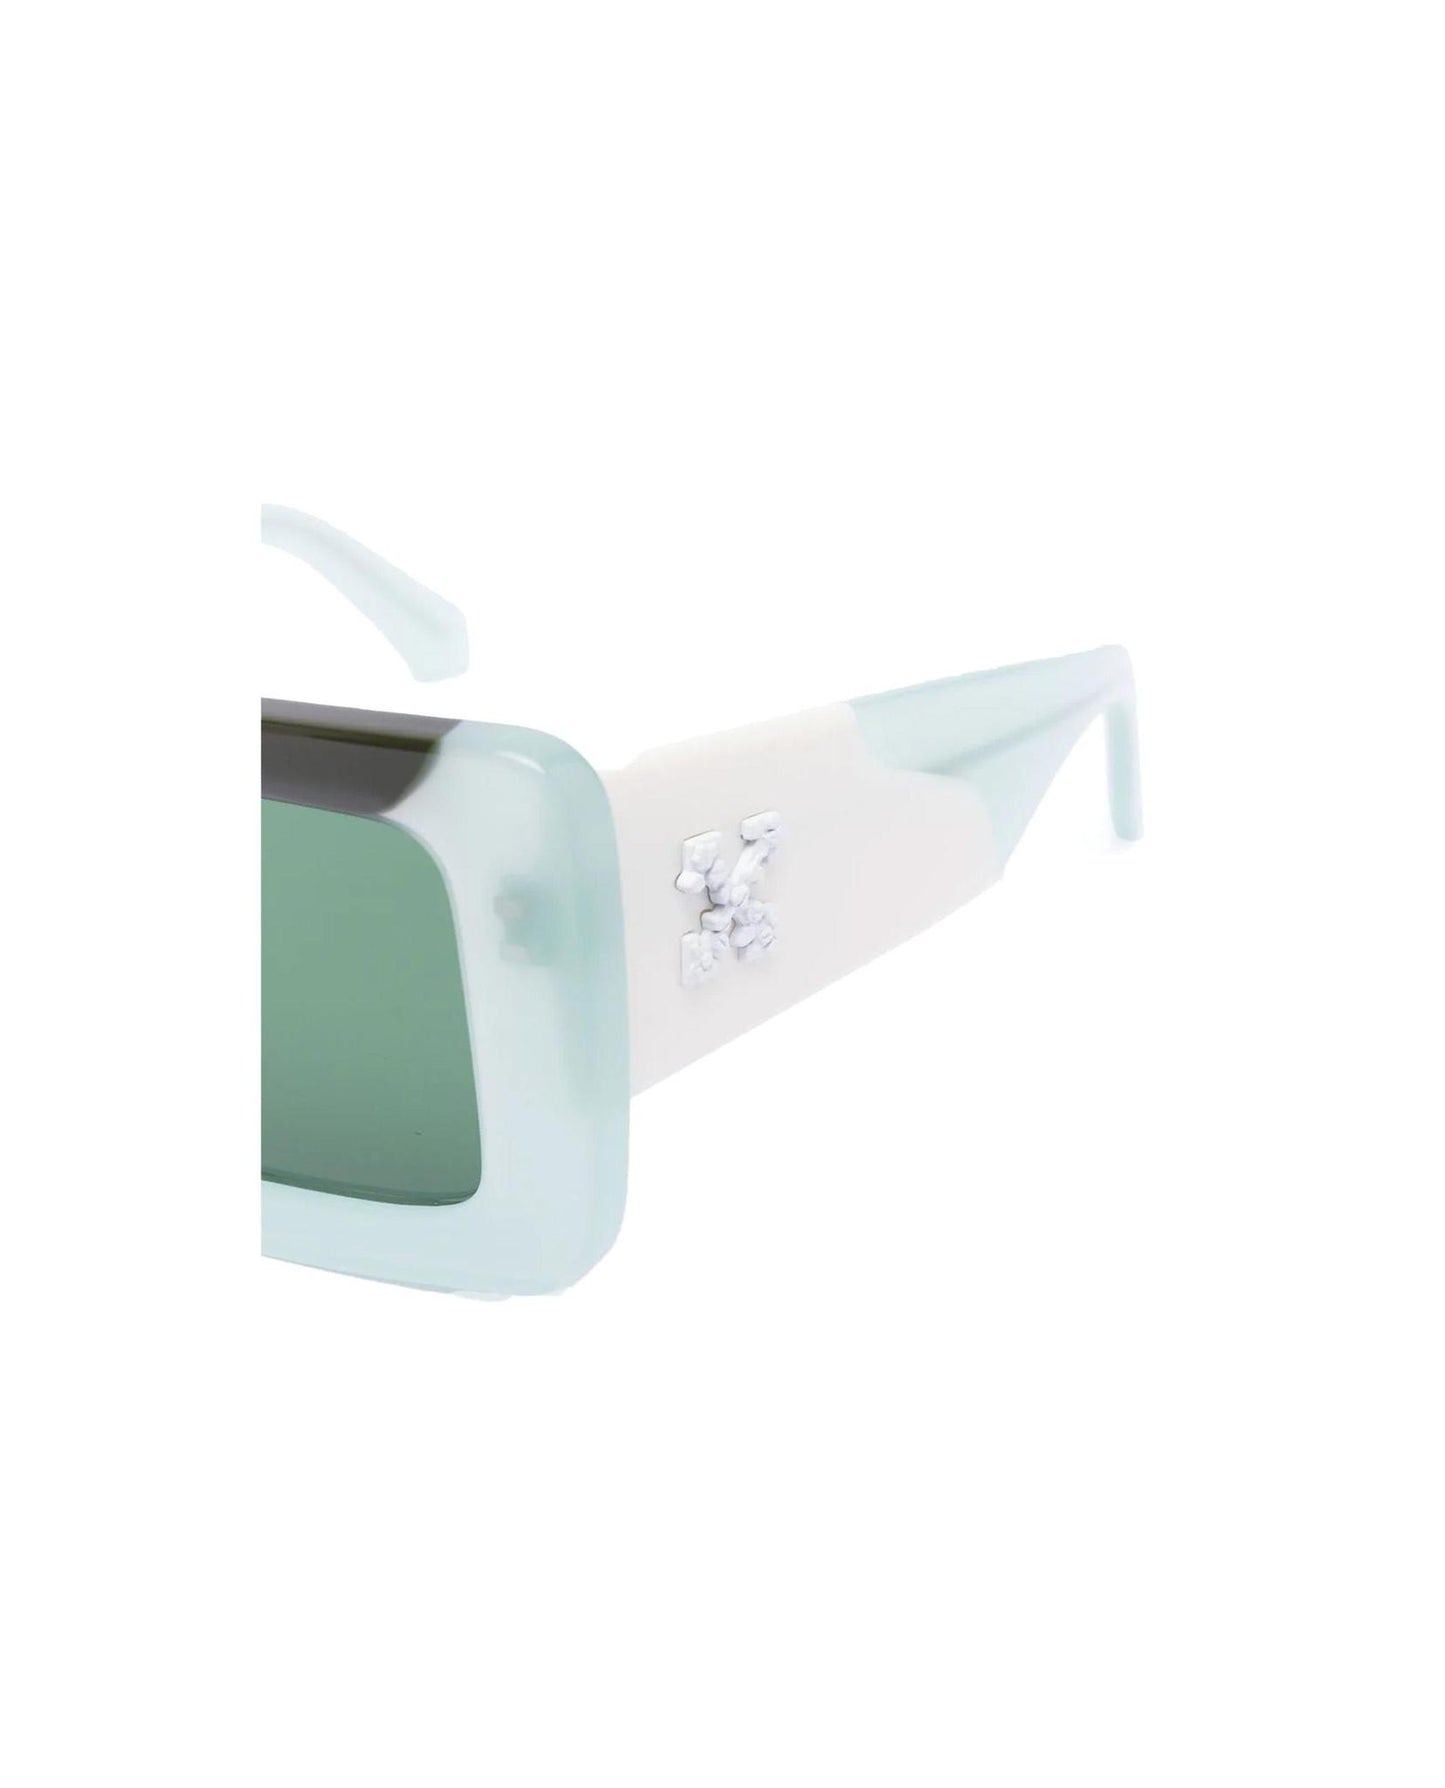 
                    
                      Off-White Seattle Sun Glasses Multicolor Teal Green
                    
                  